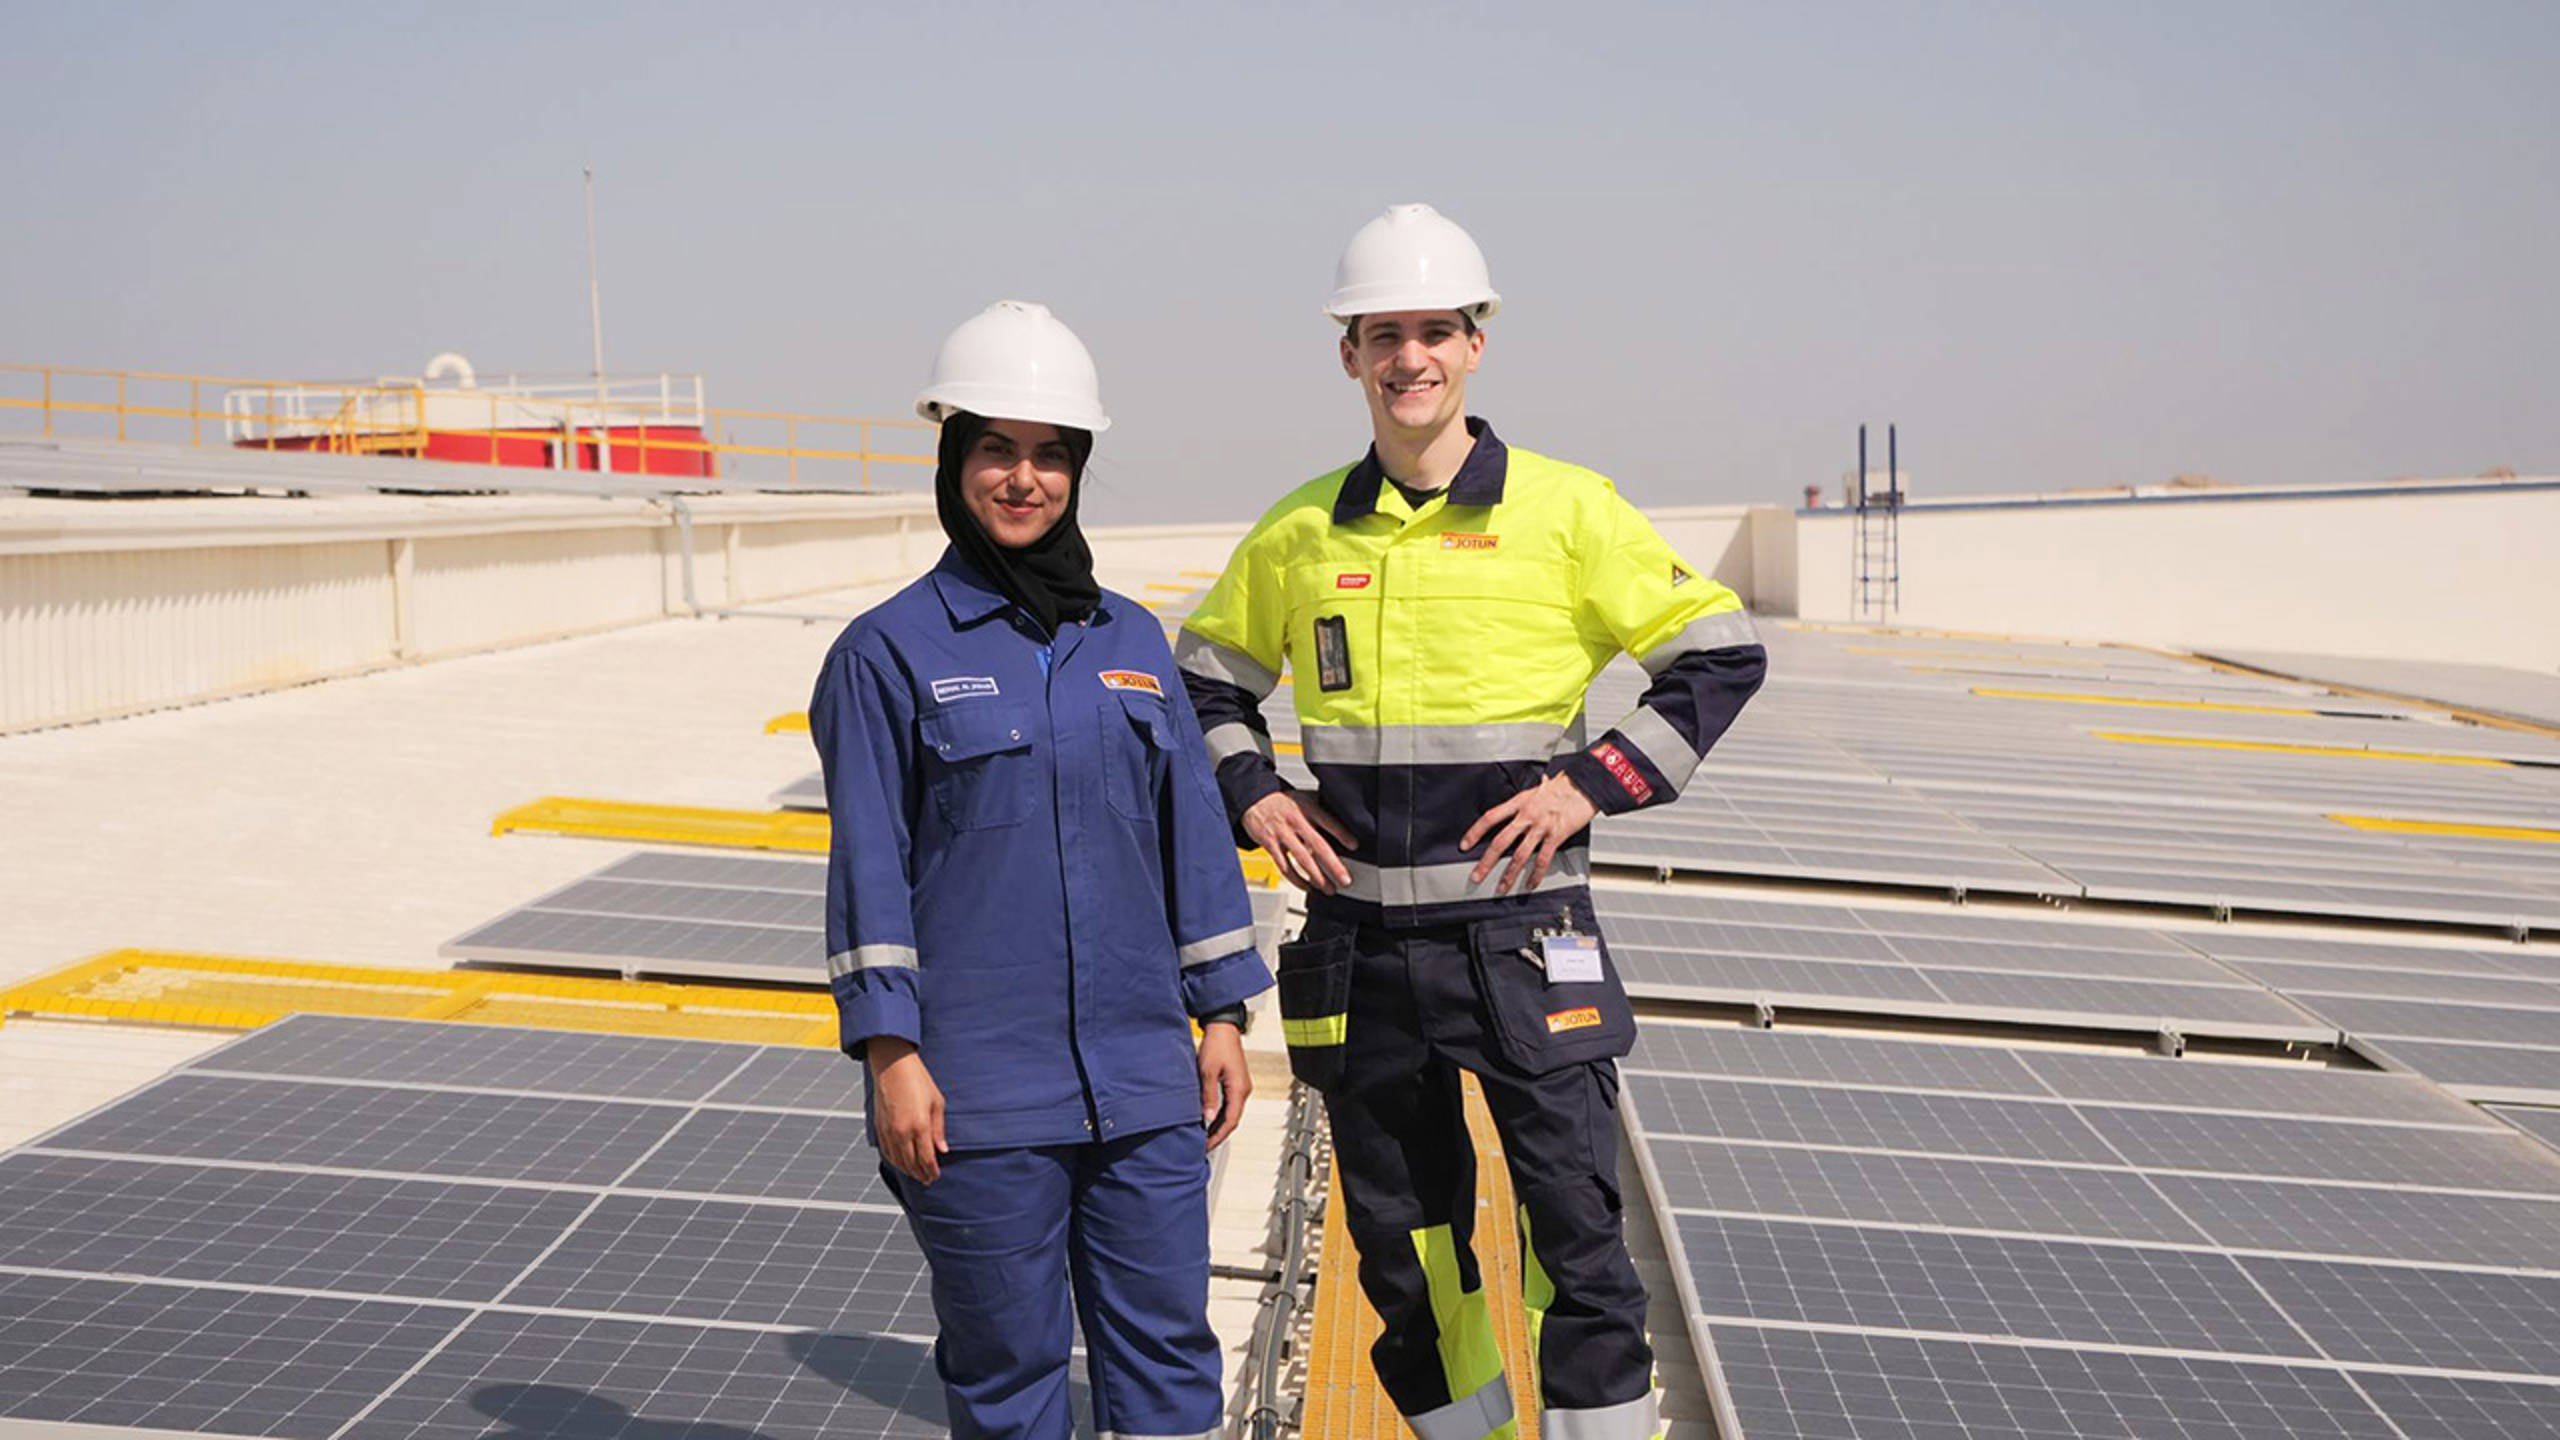 Matthieu Augereau on the rooftop of the factory in Oman